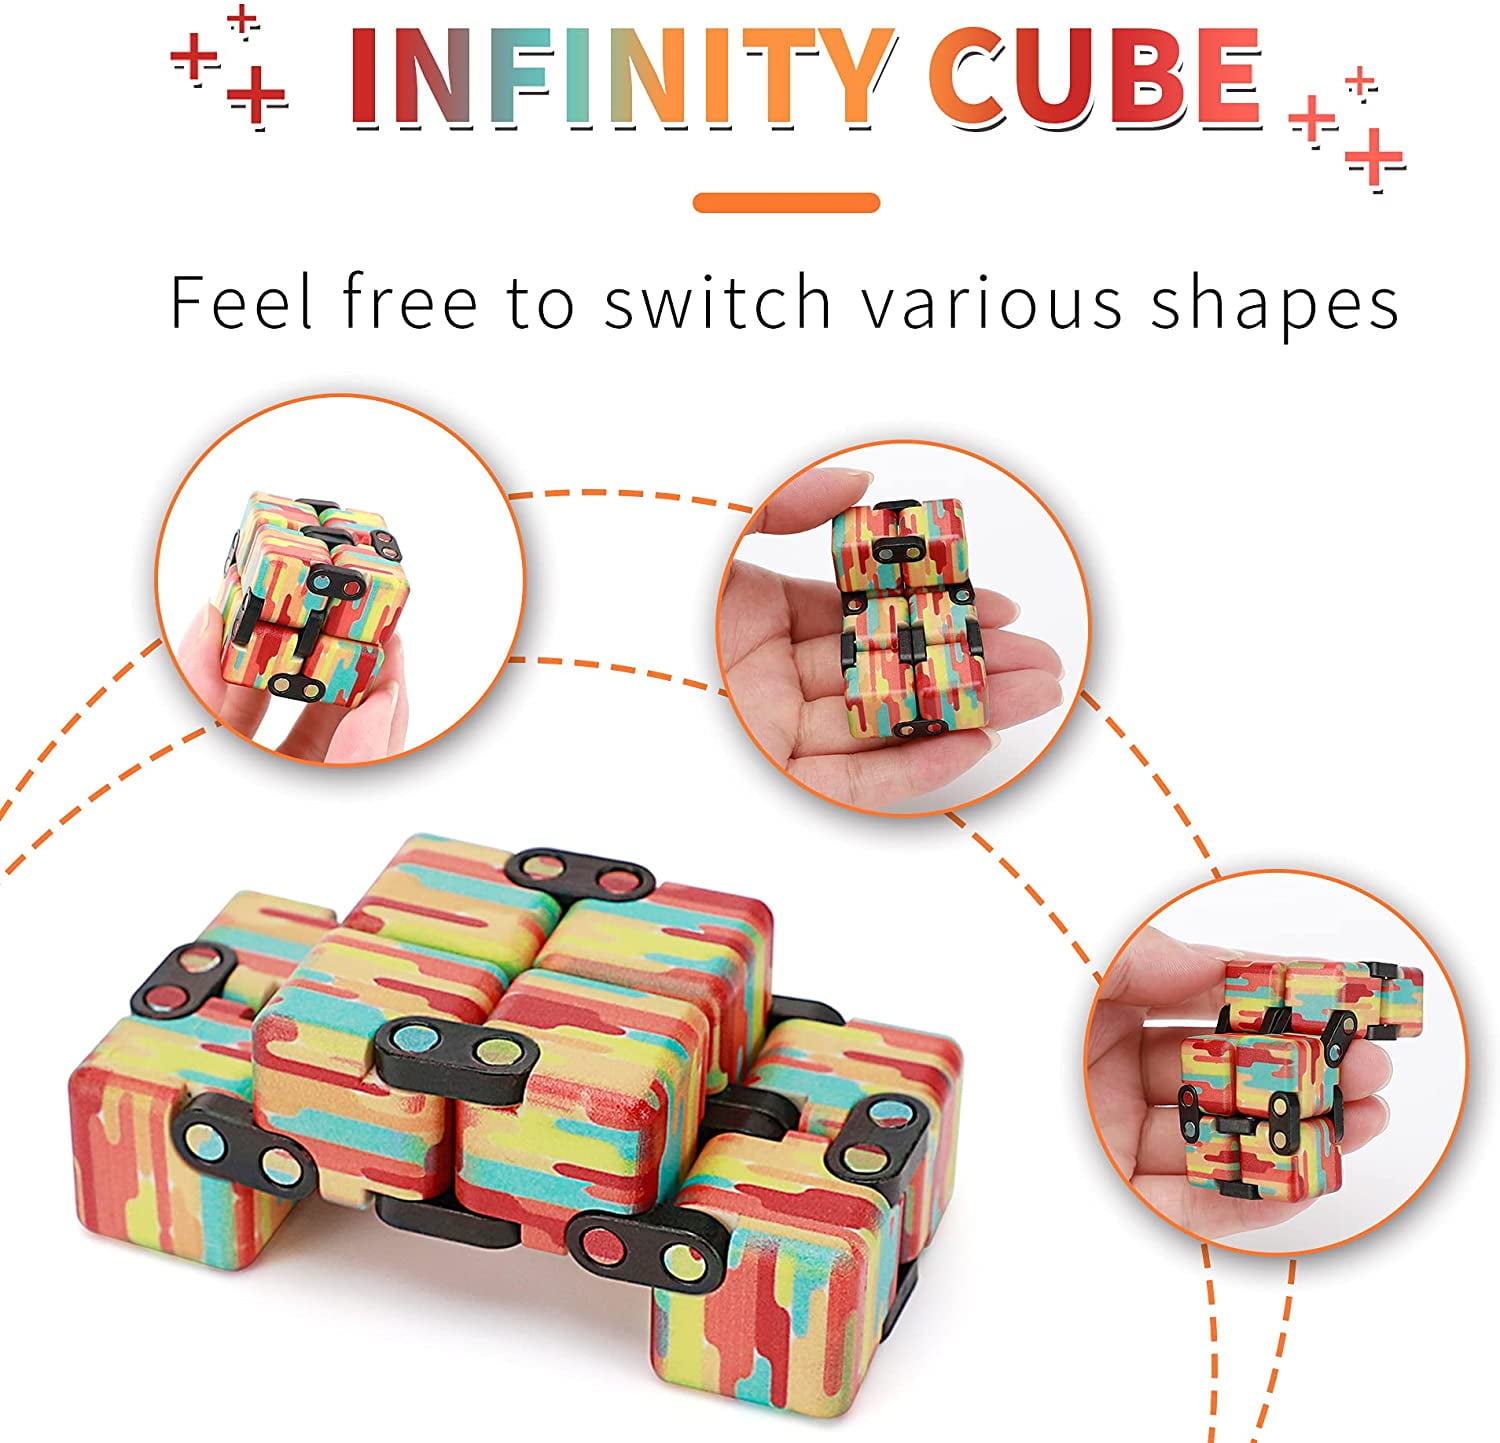 2 Pcs Infinity Cube for Stress Relief Fidget 